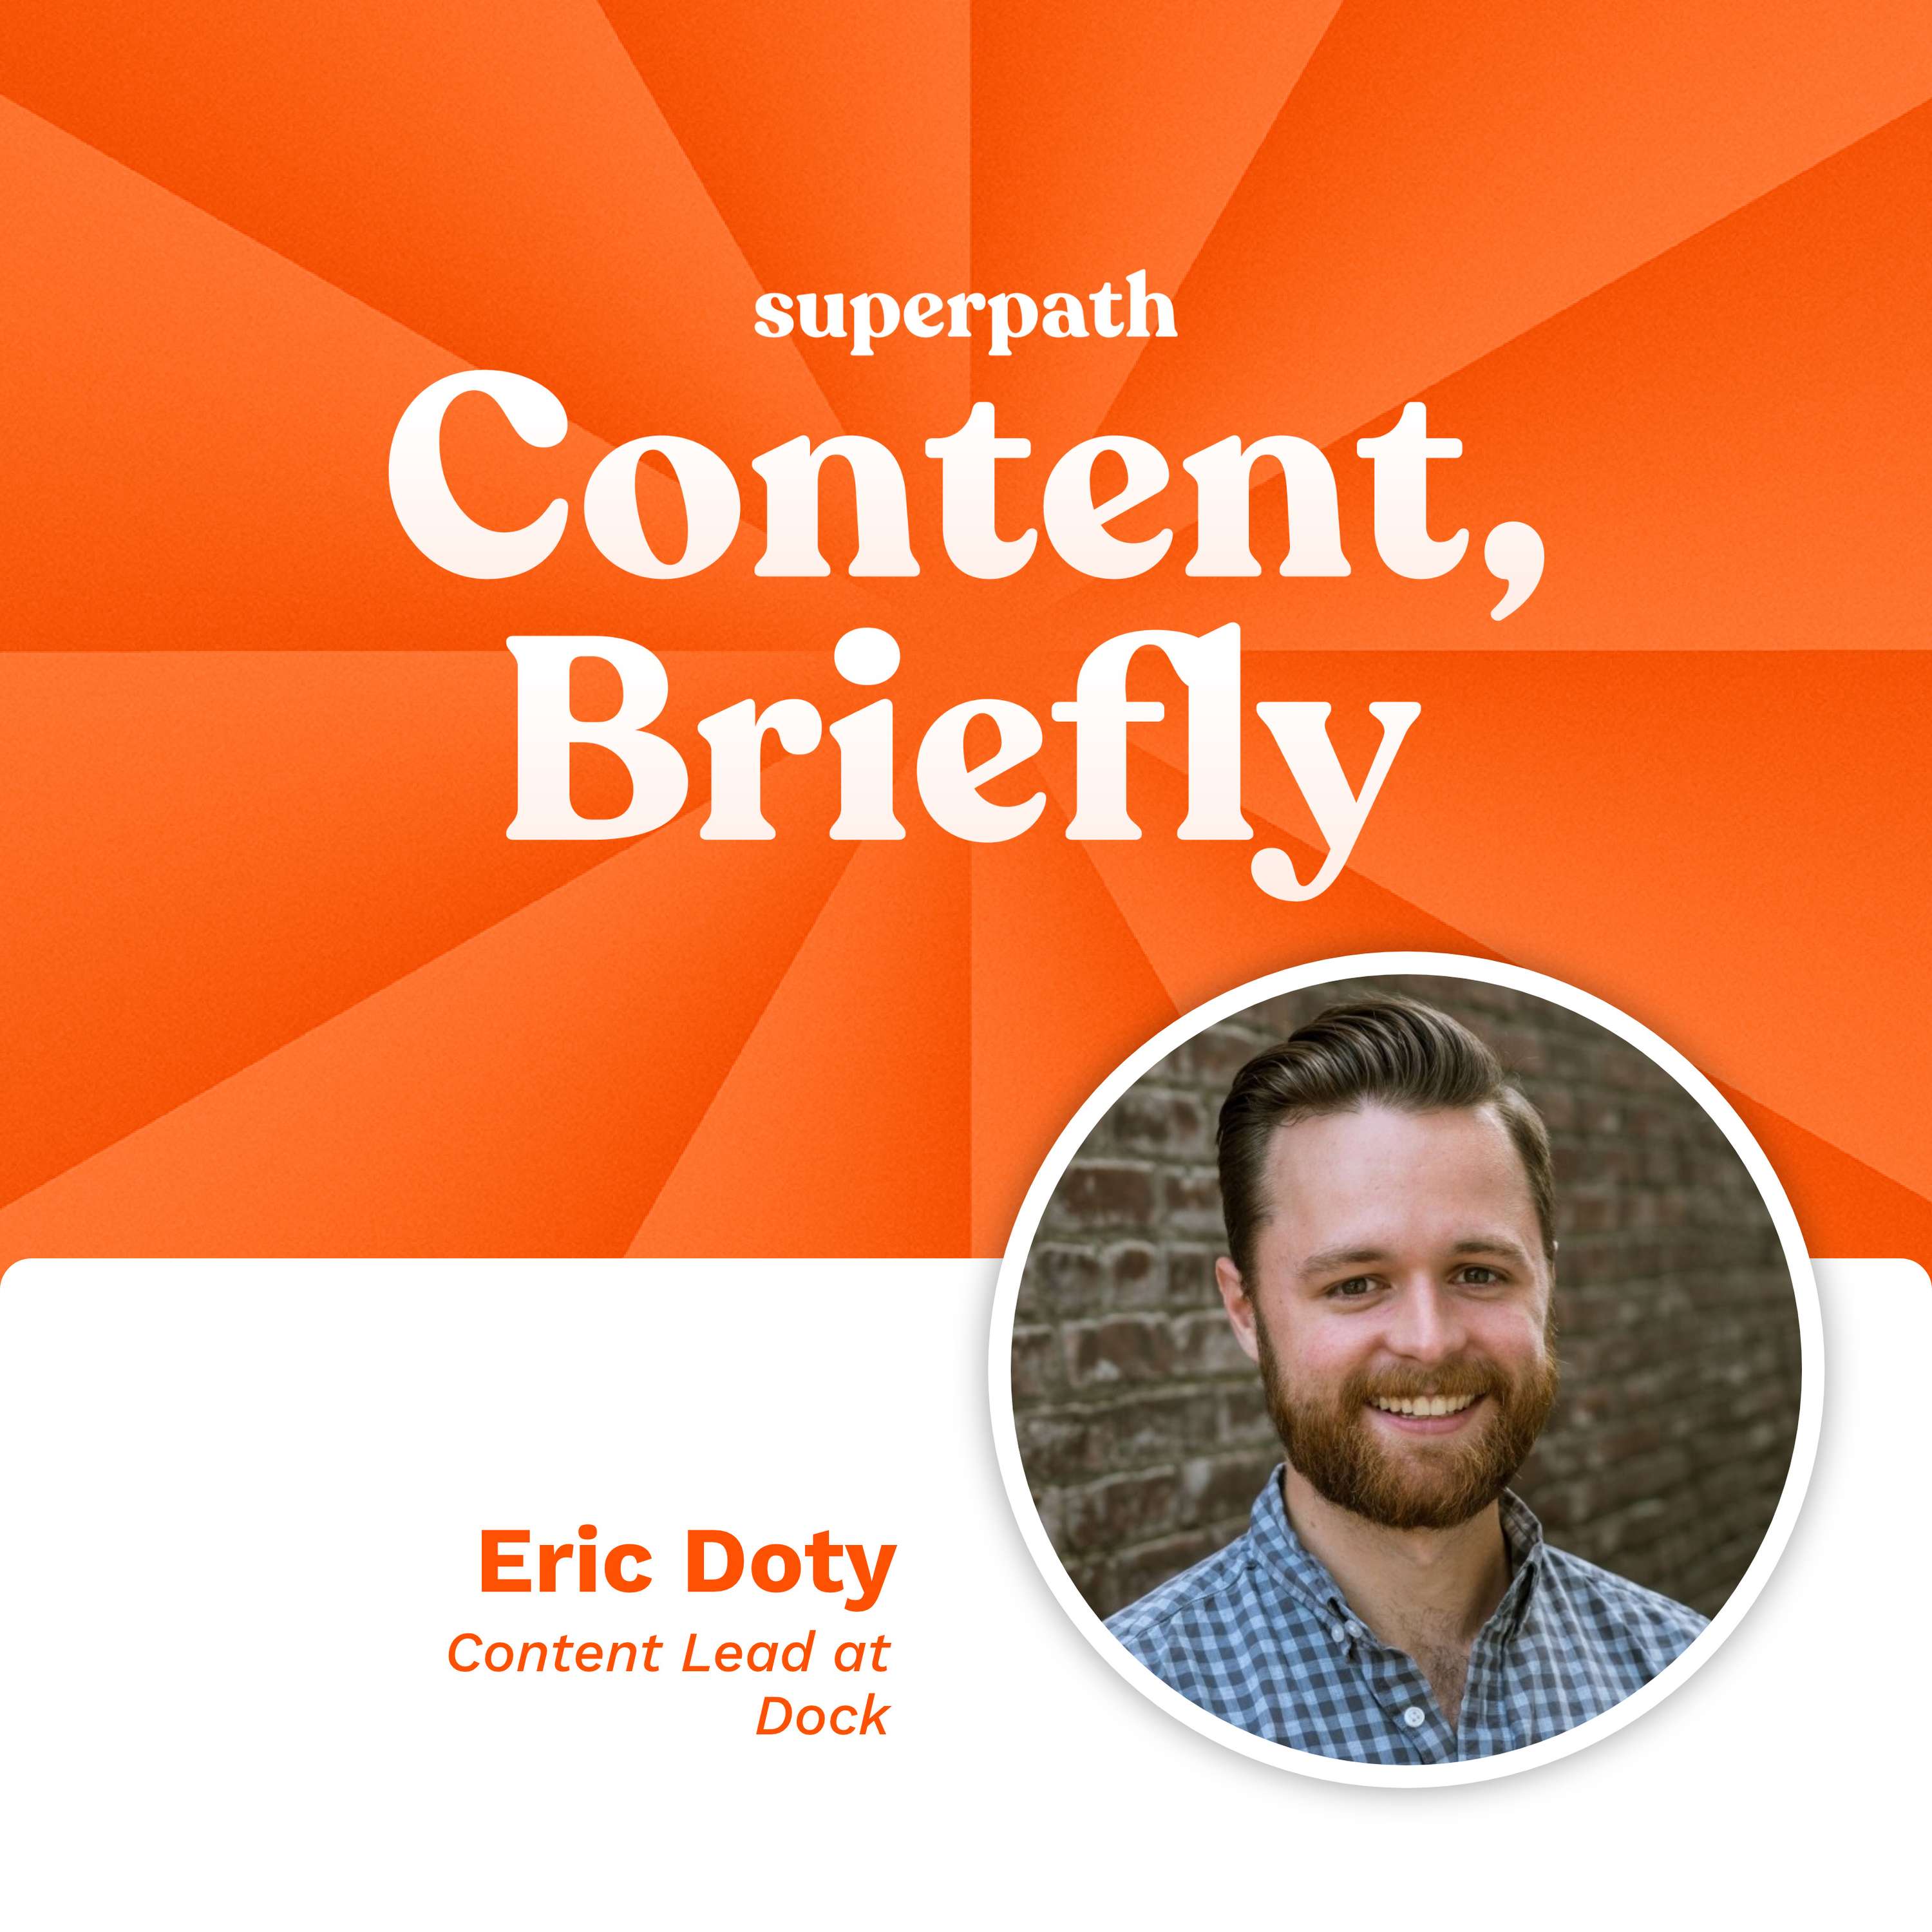 Dock: Eric Doty on automation, learning new skills, and LinkedIn superstardom